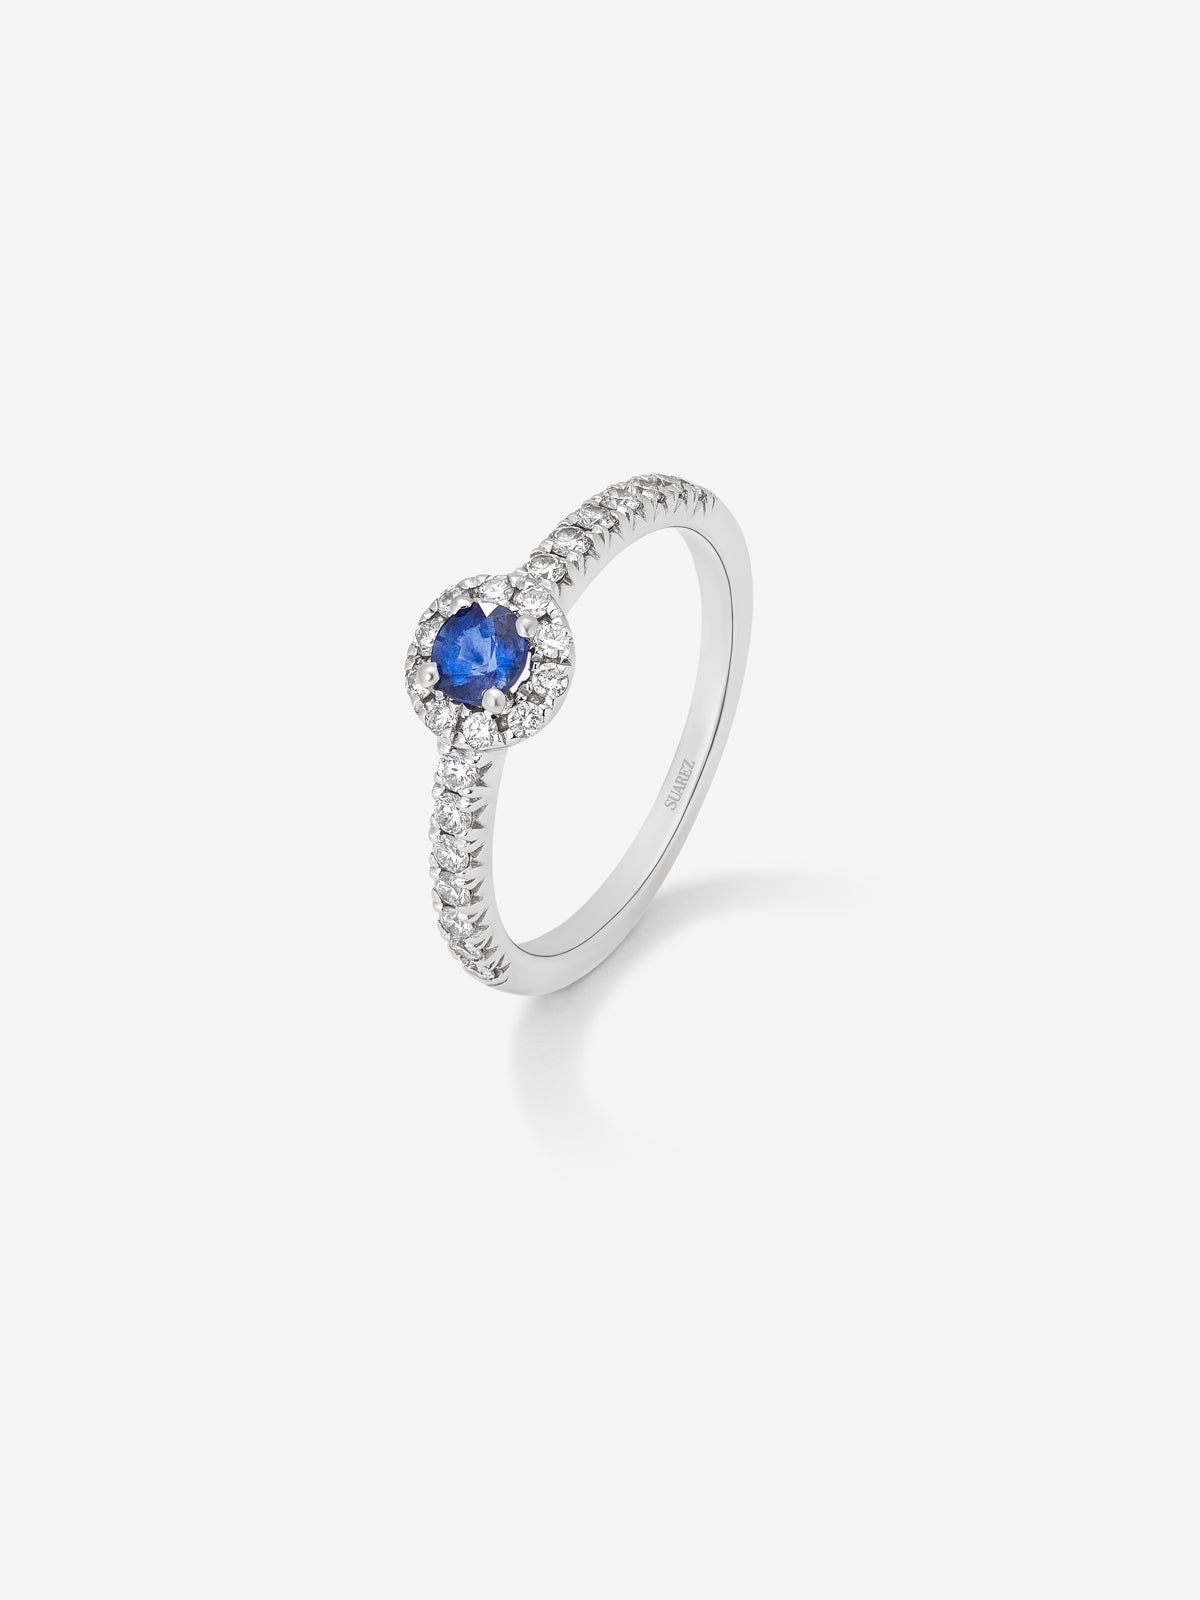 18K white gold ring with brilliant-cut blue sapphire of 0.4 cts and border and arm of 24 brilliant-cut diamonds with a total of 0.3 cts